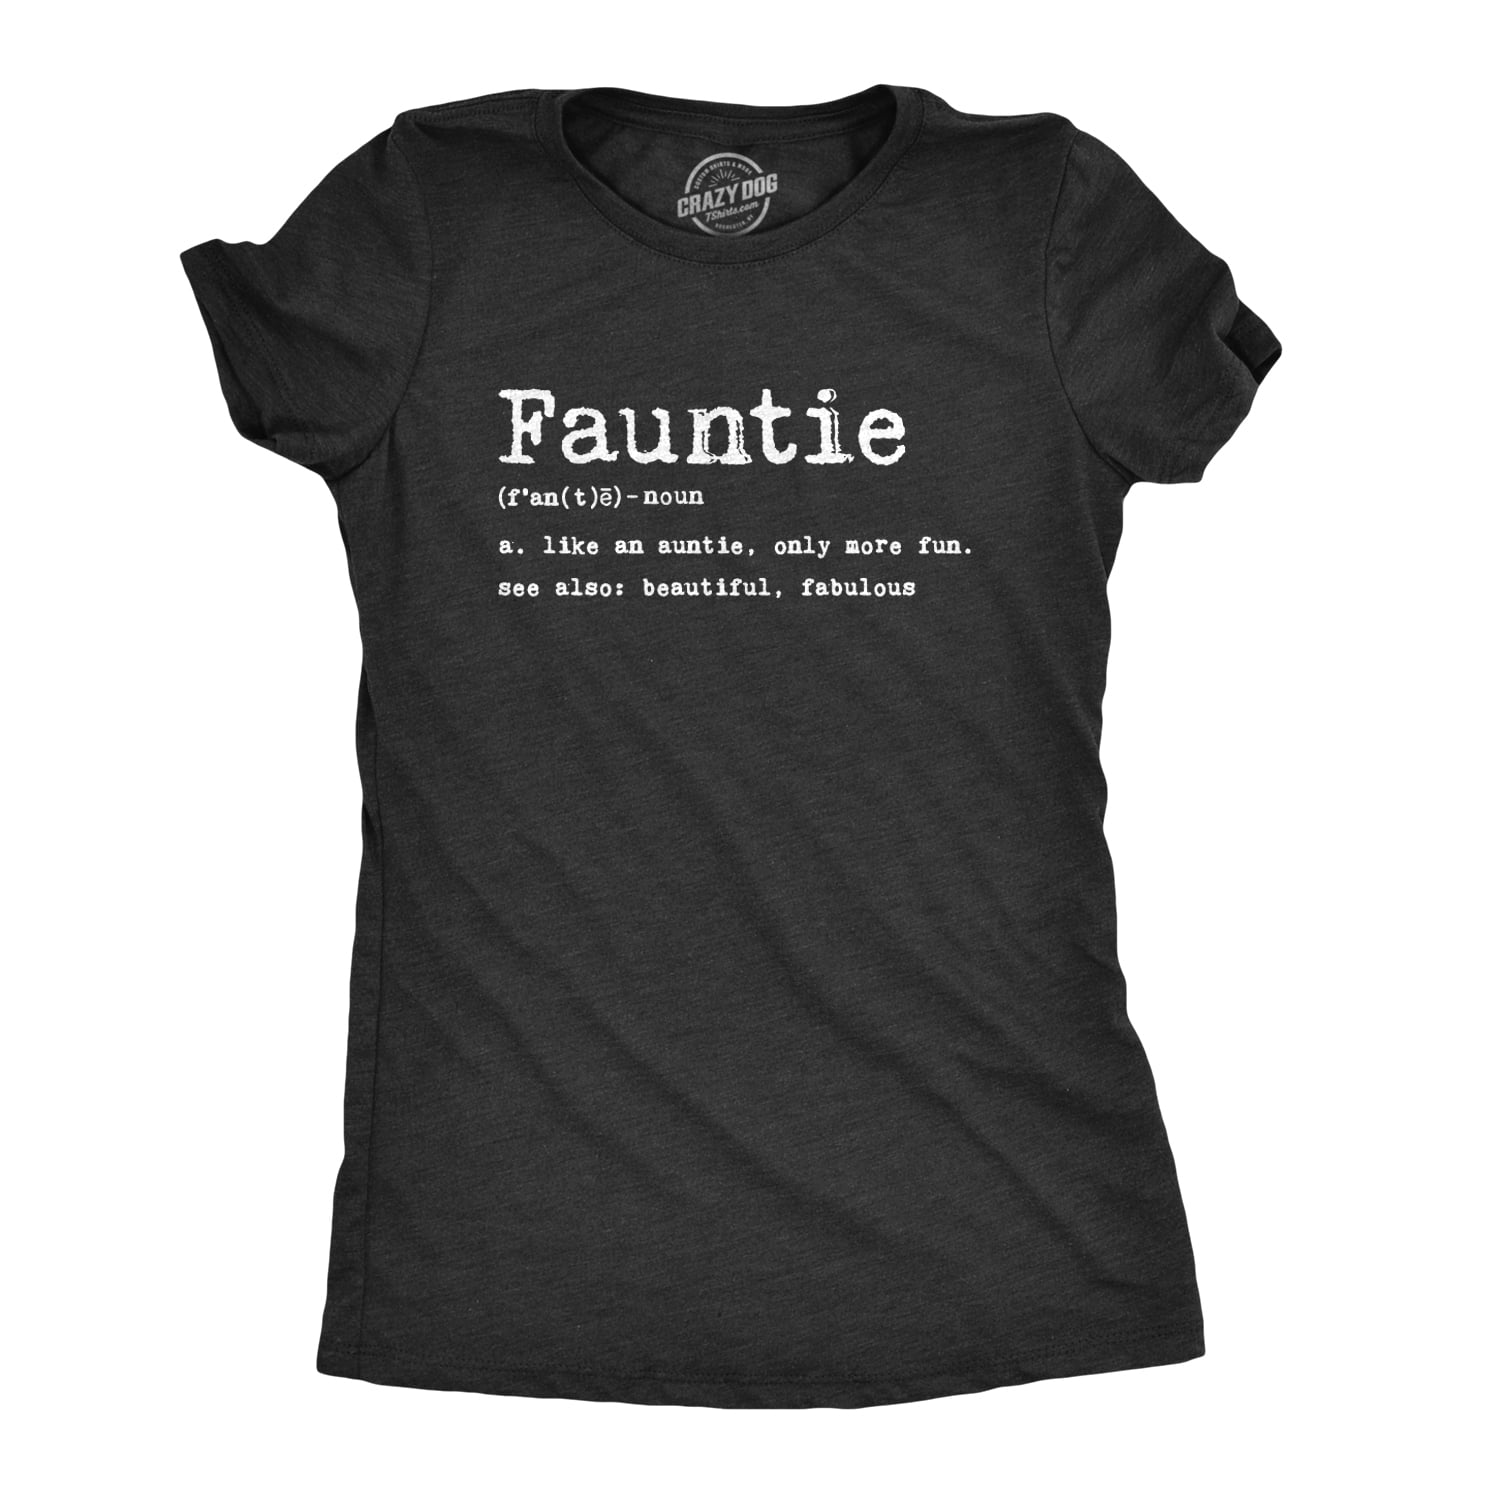 Promoted to Auntie Cool Aunt Cool Aunt Gift from Nephew New Aunt Tee Shirt Aunt T Shirt for Auntie for Birthday Aunt Shirt for Women